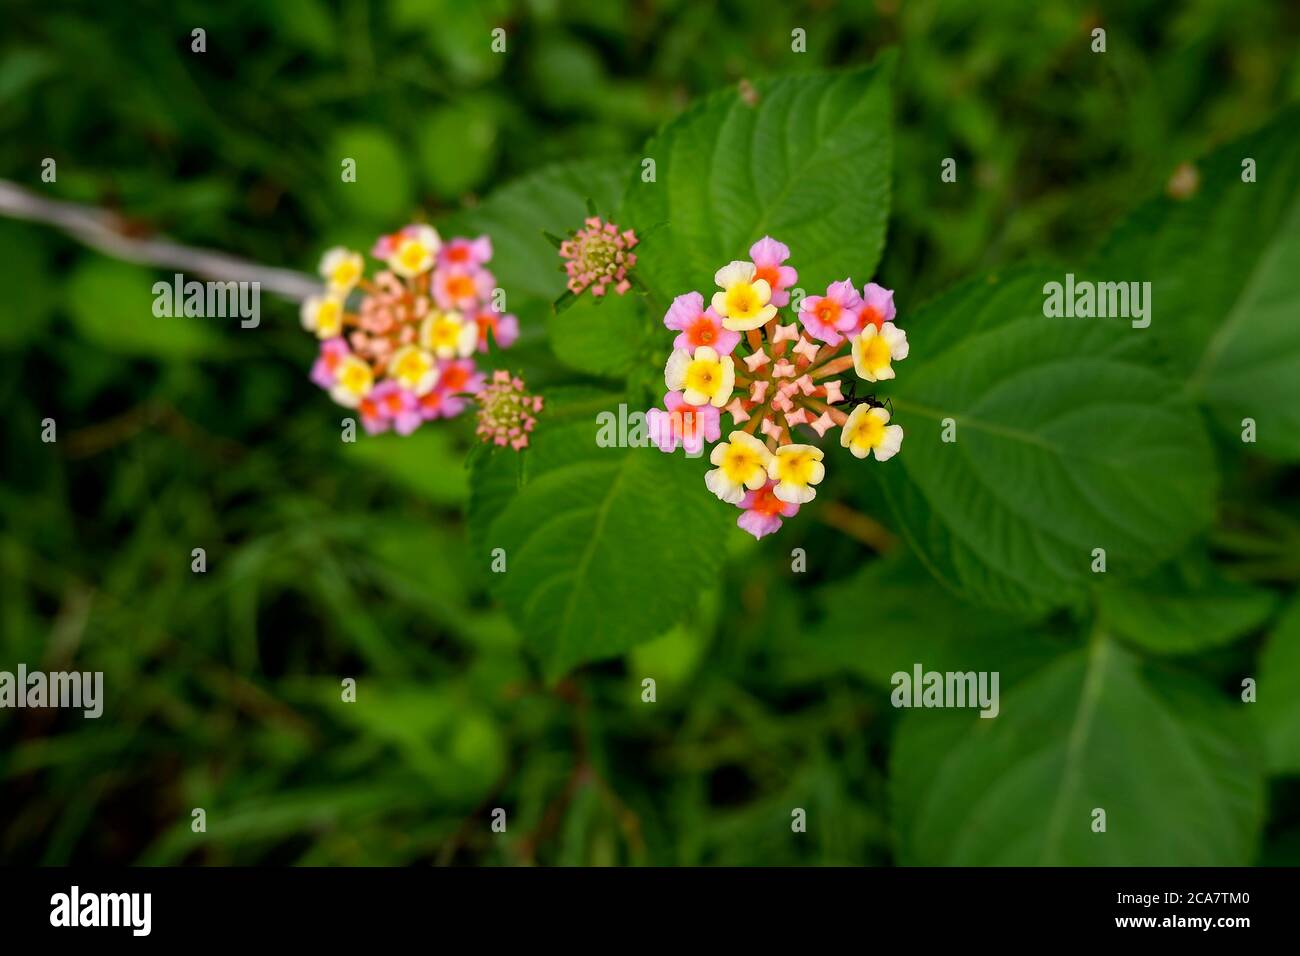 a top view of pink & yellow tiny flowers isolated on plant in garden Stock Photo